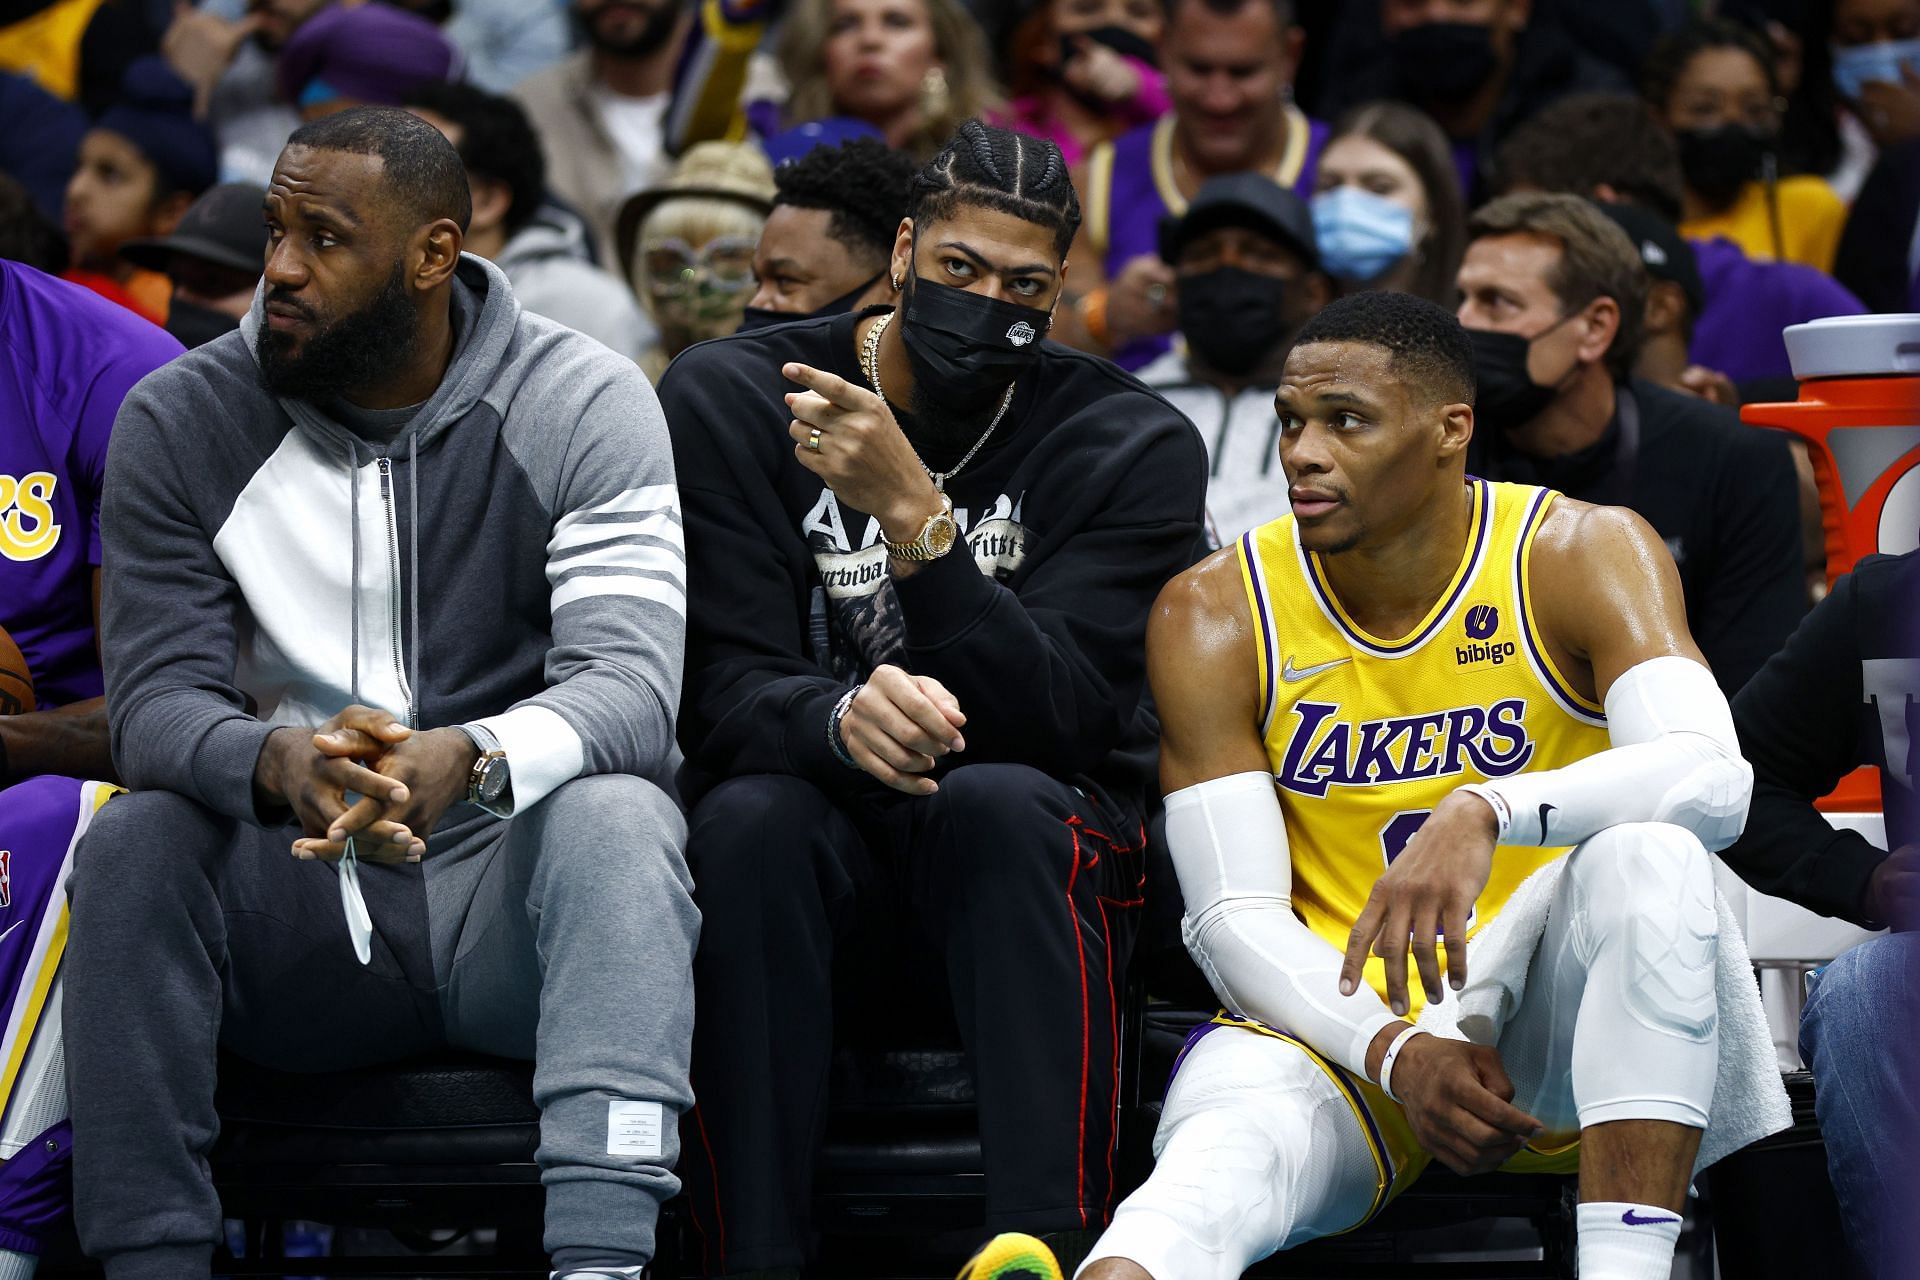 Los Angeles Lakers forward LeBron James is the latest to buzz about Joe Burrow